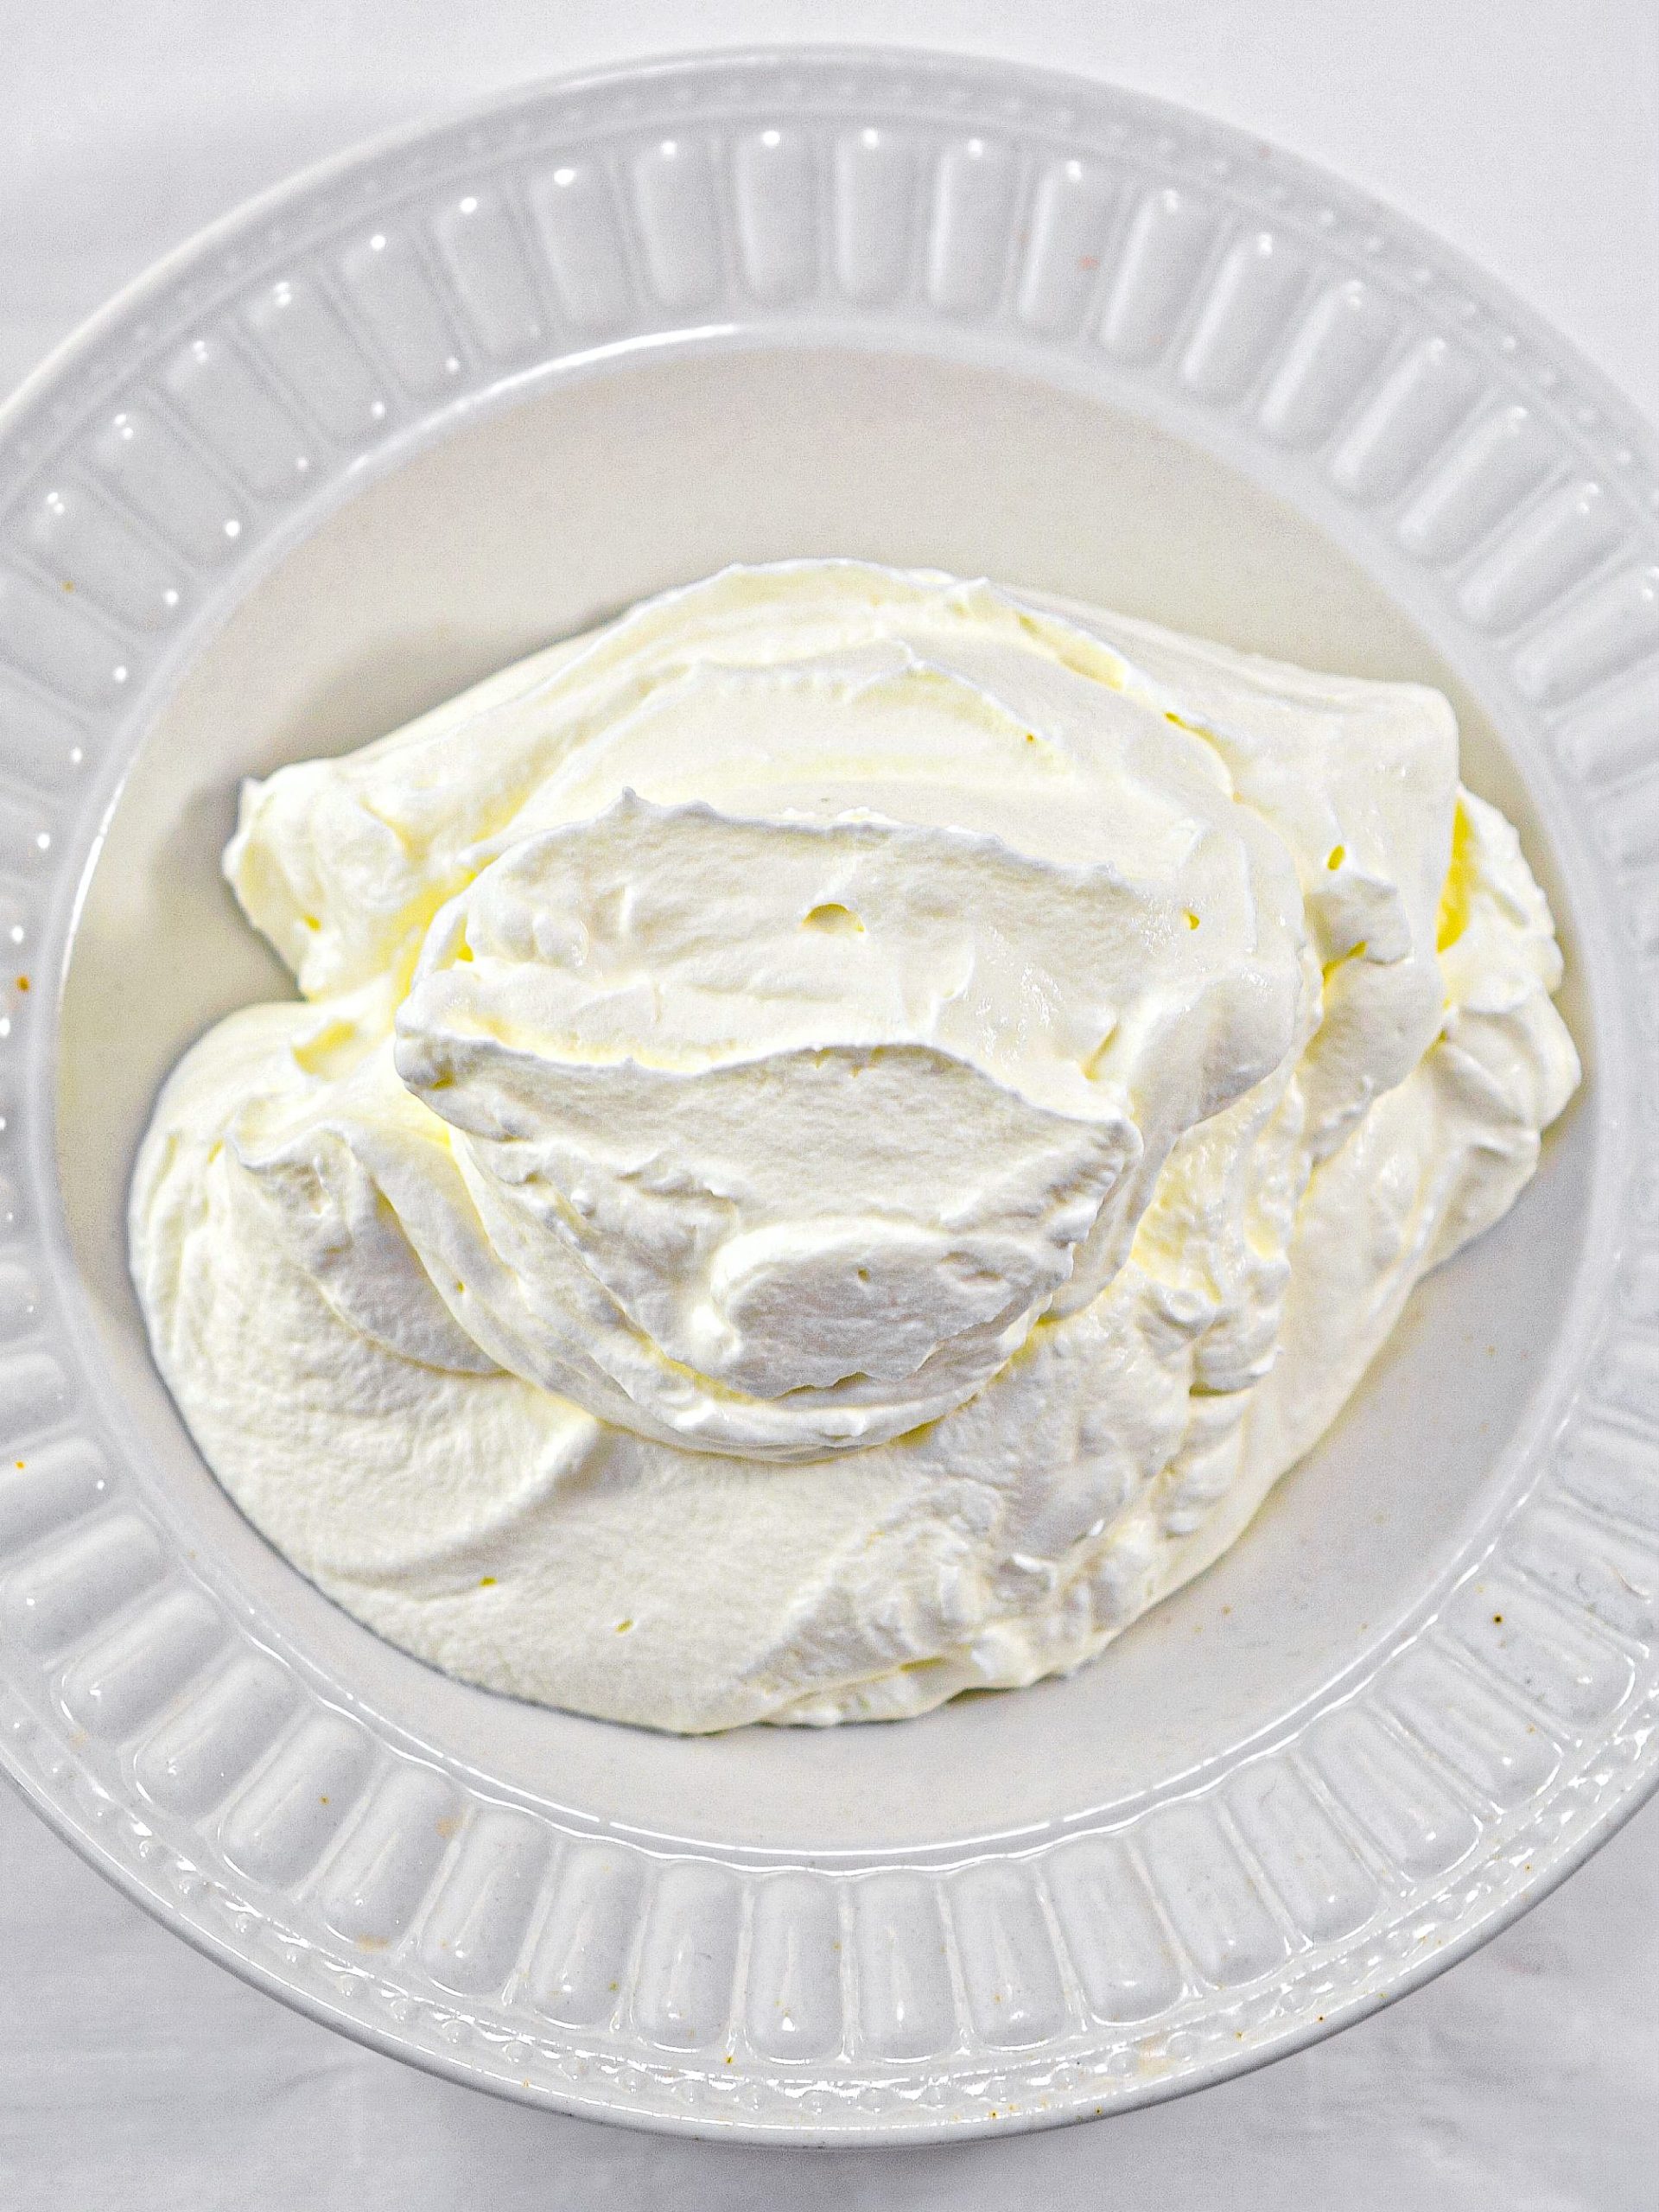 When ready, beat the heavy whipping cream in a mixing bowl until it forms stiff peaks, and set aside.